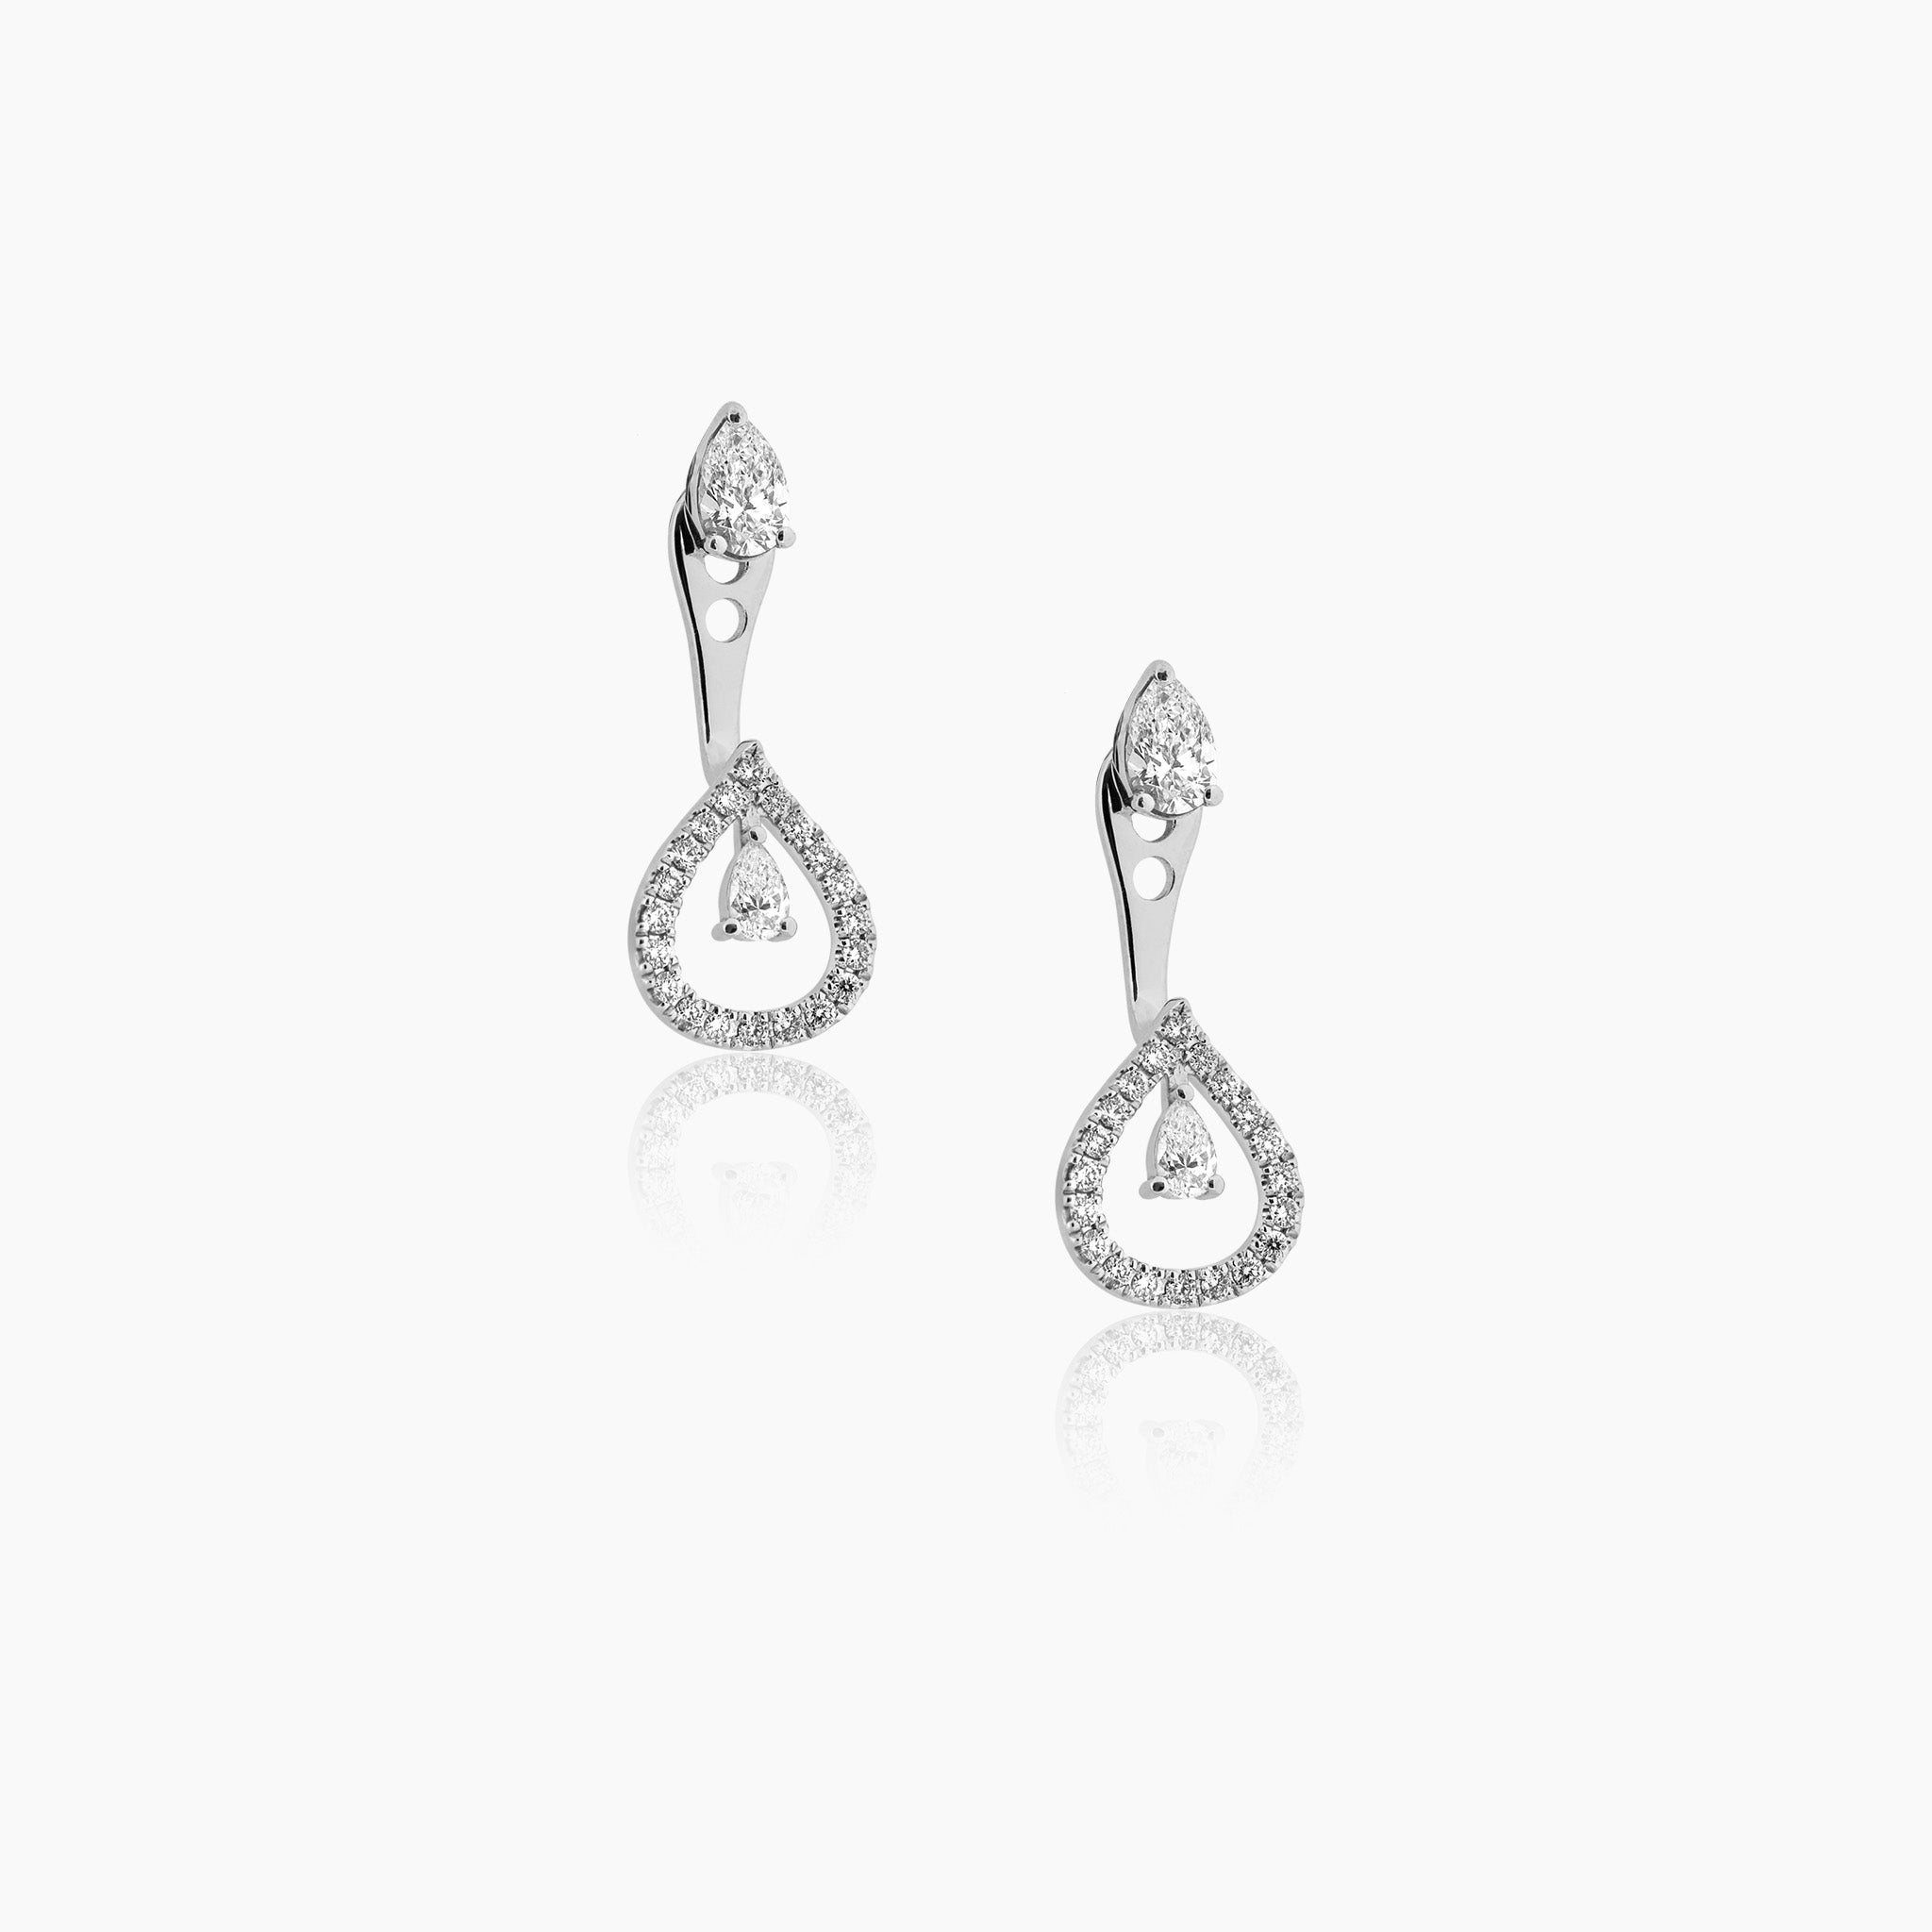 Venus single diamond earrings featuring a pear-shaped stud convertible design with additional extension diamonds, displayed on an off-white background.